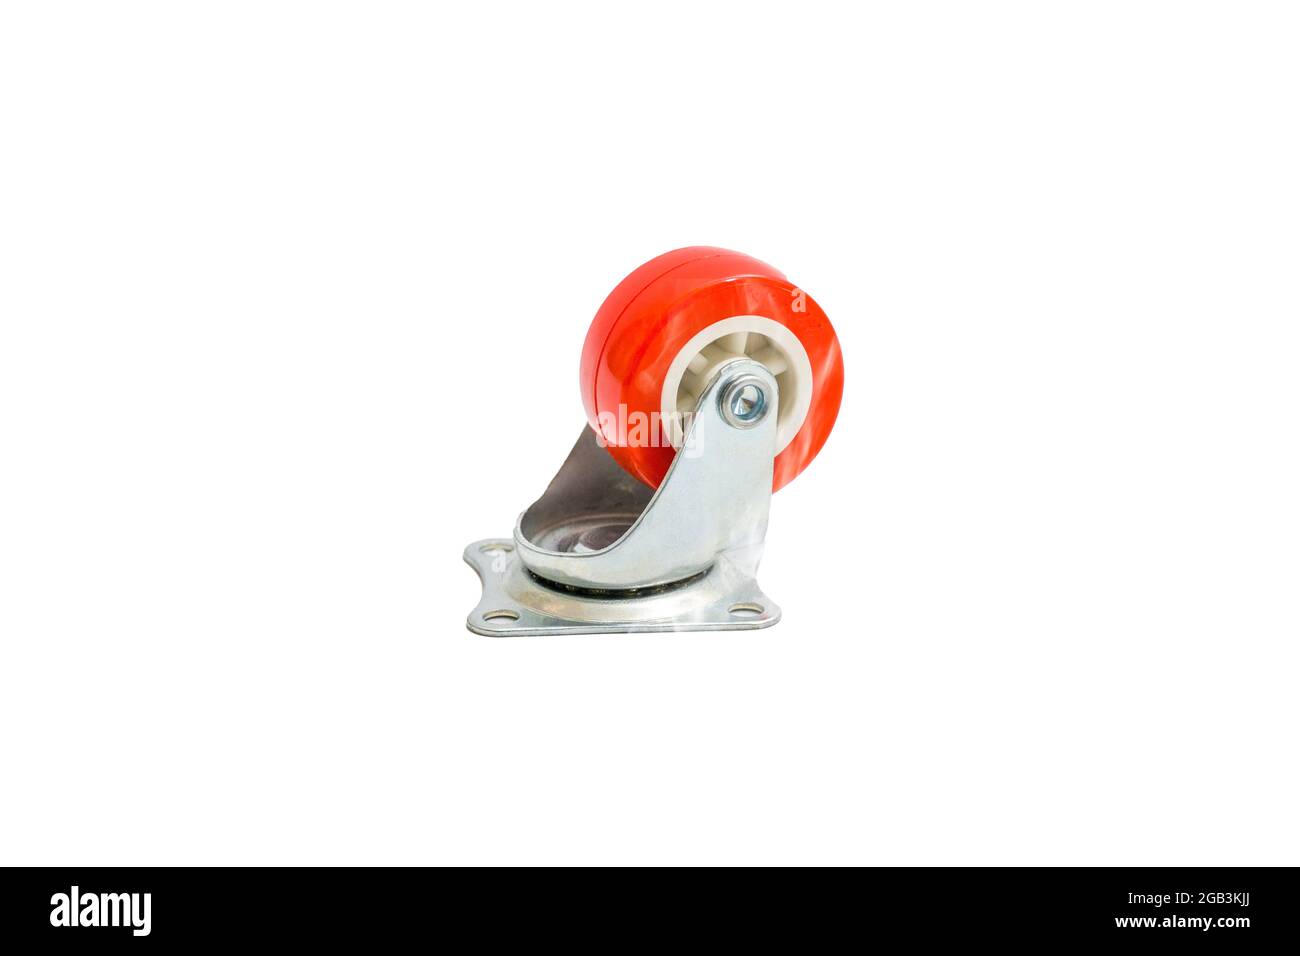 Red trolley wheels for repair or replacement maintenance change. Stock Photo